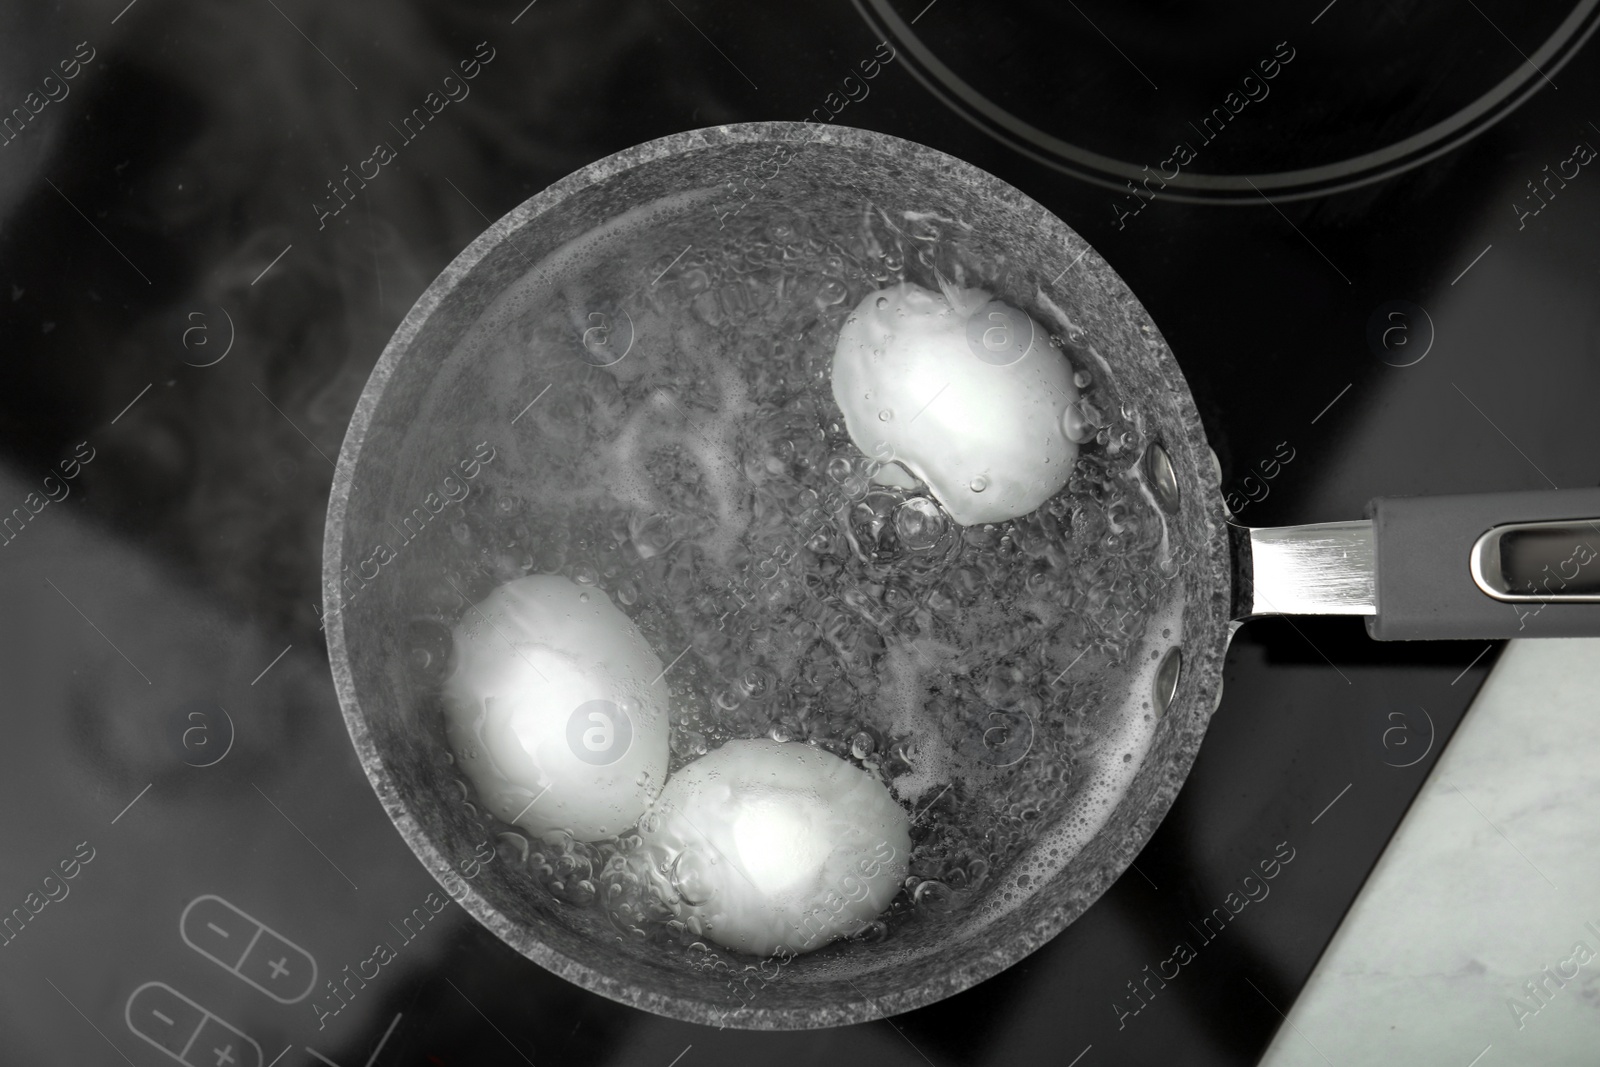 Photo of Boiling chicken eggs in saucepan on electric stove, top view